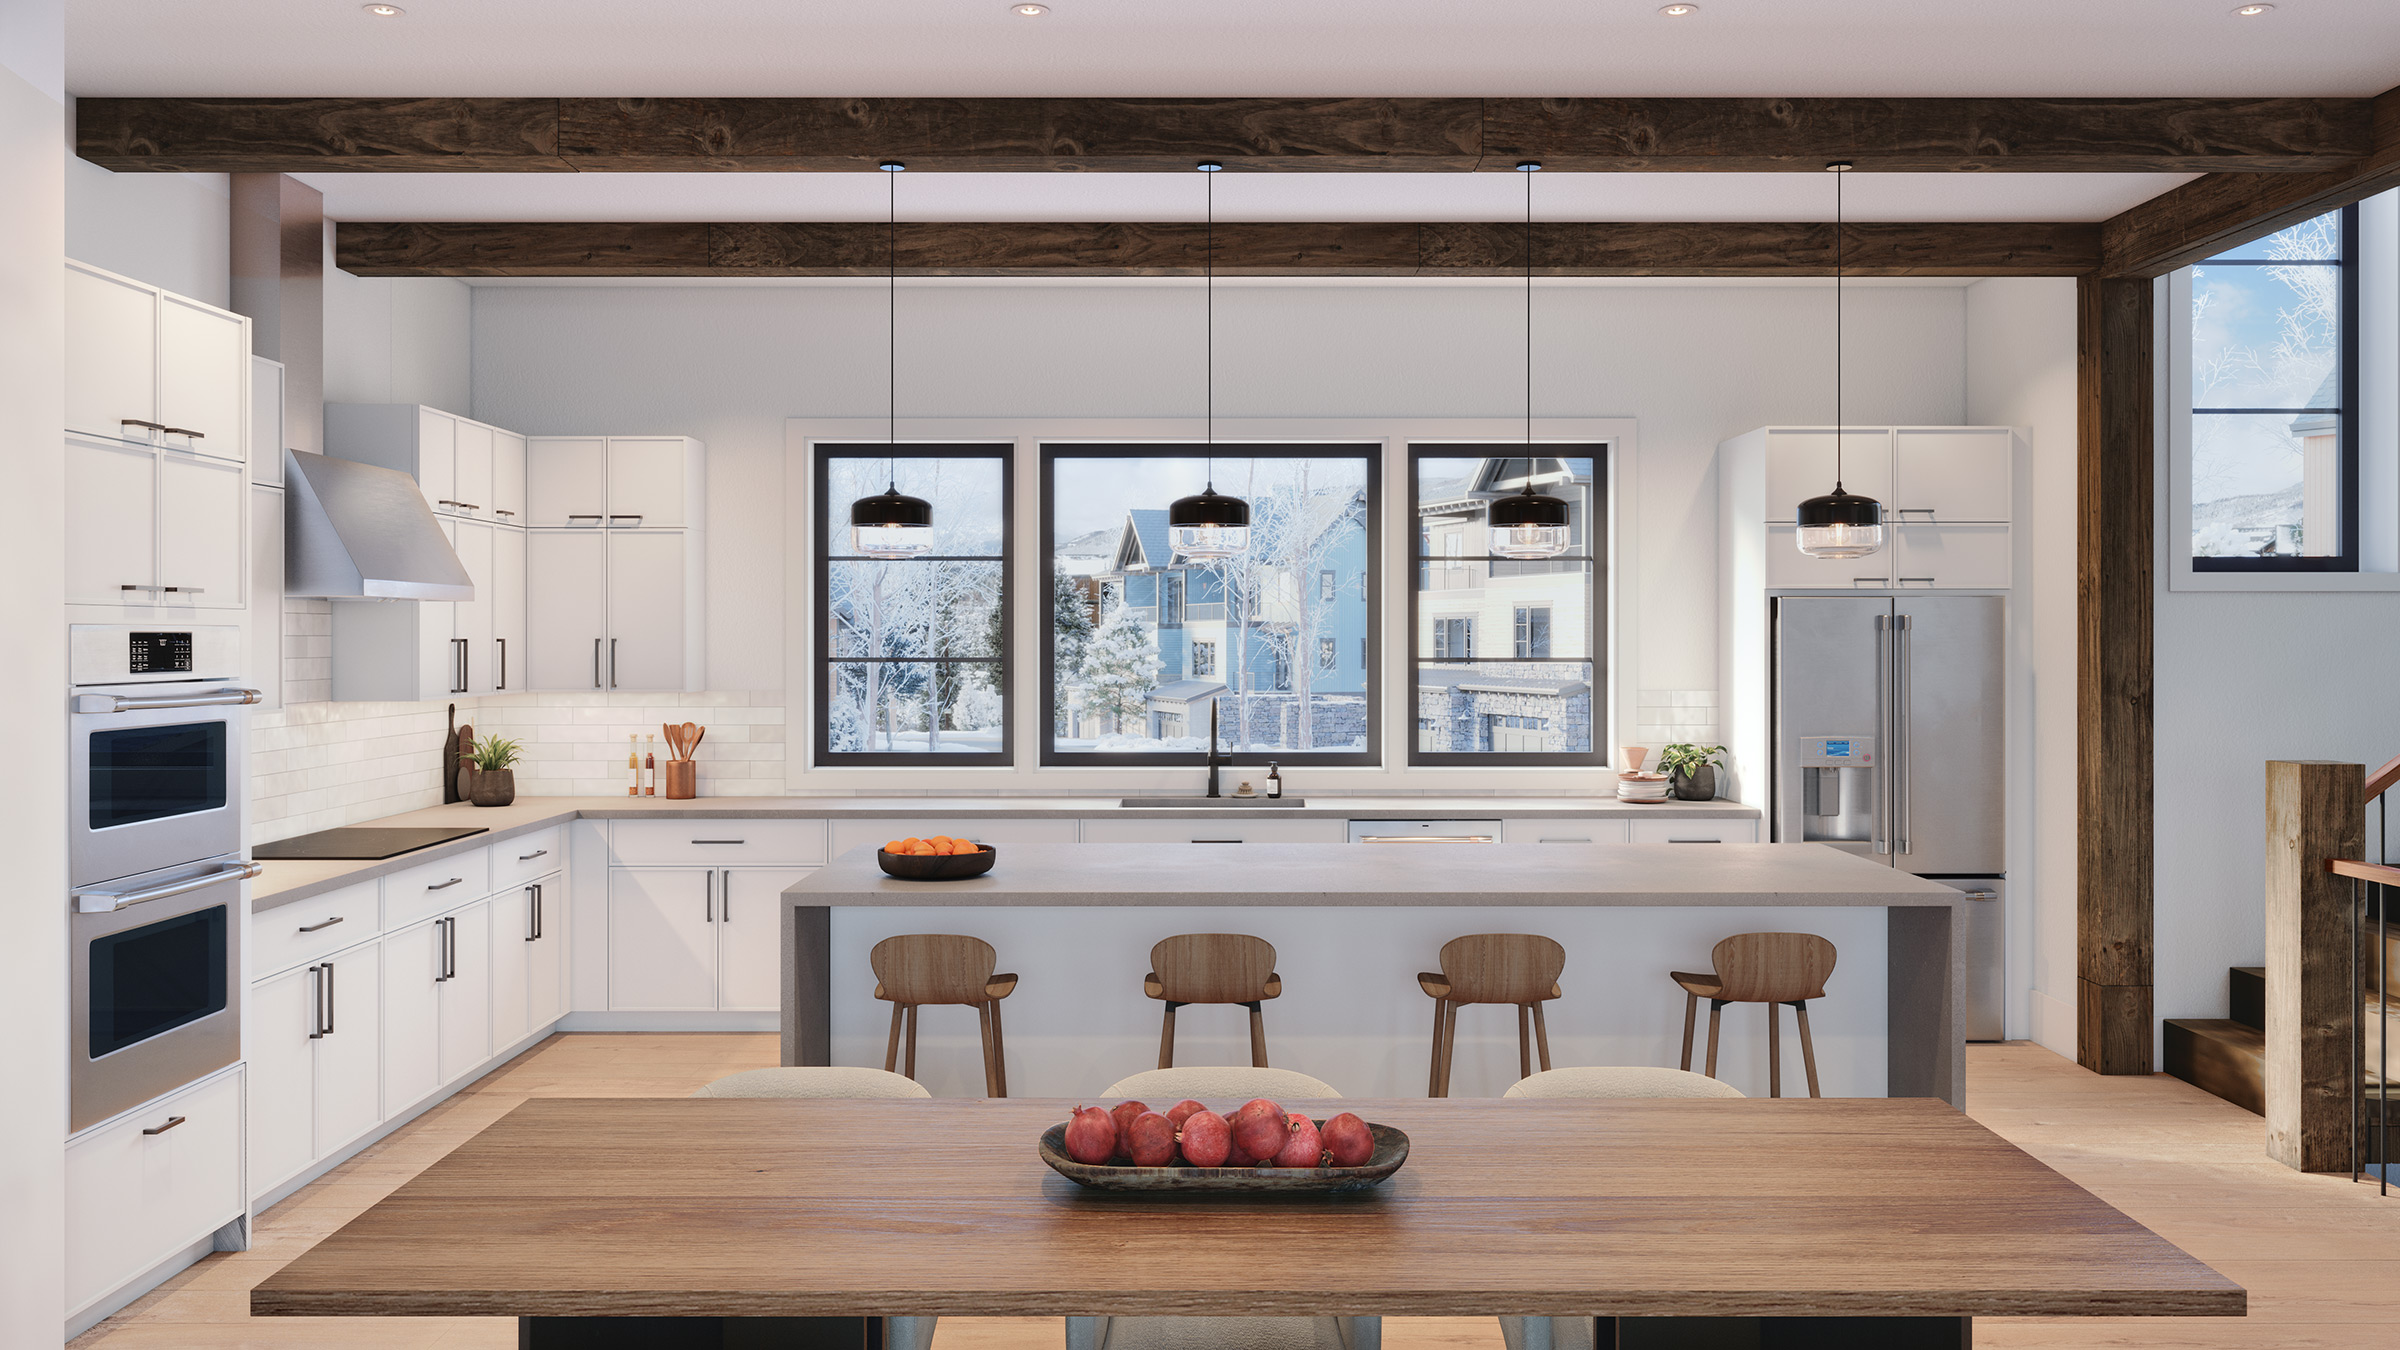 Spacious, gourmet kitchens feature stylish form, optimal function, and mountain views.